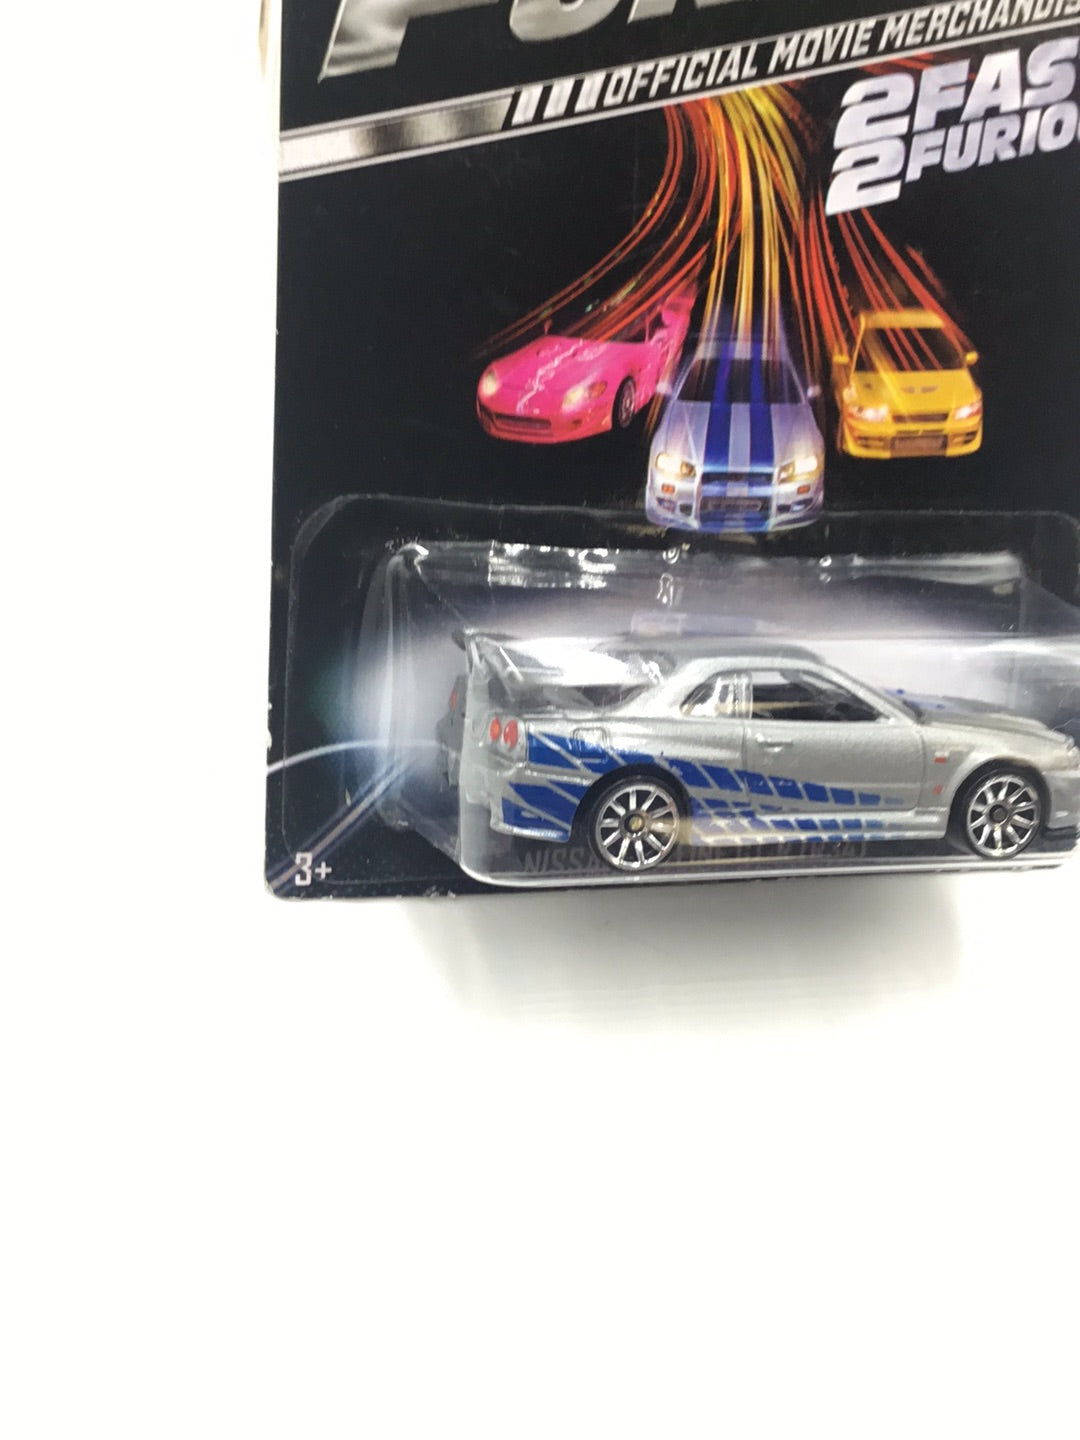 Hot wheels fast and furious Nissan skyline GT-R BNR34 2 fast 2 Furious with Protector 3/8